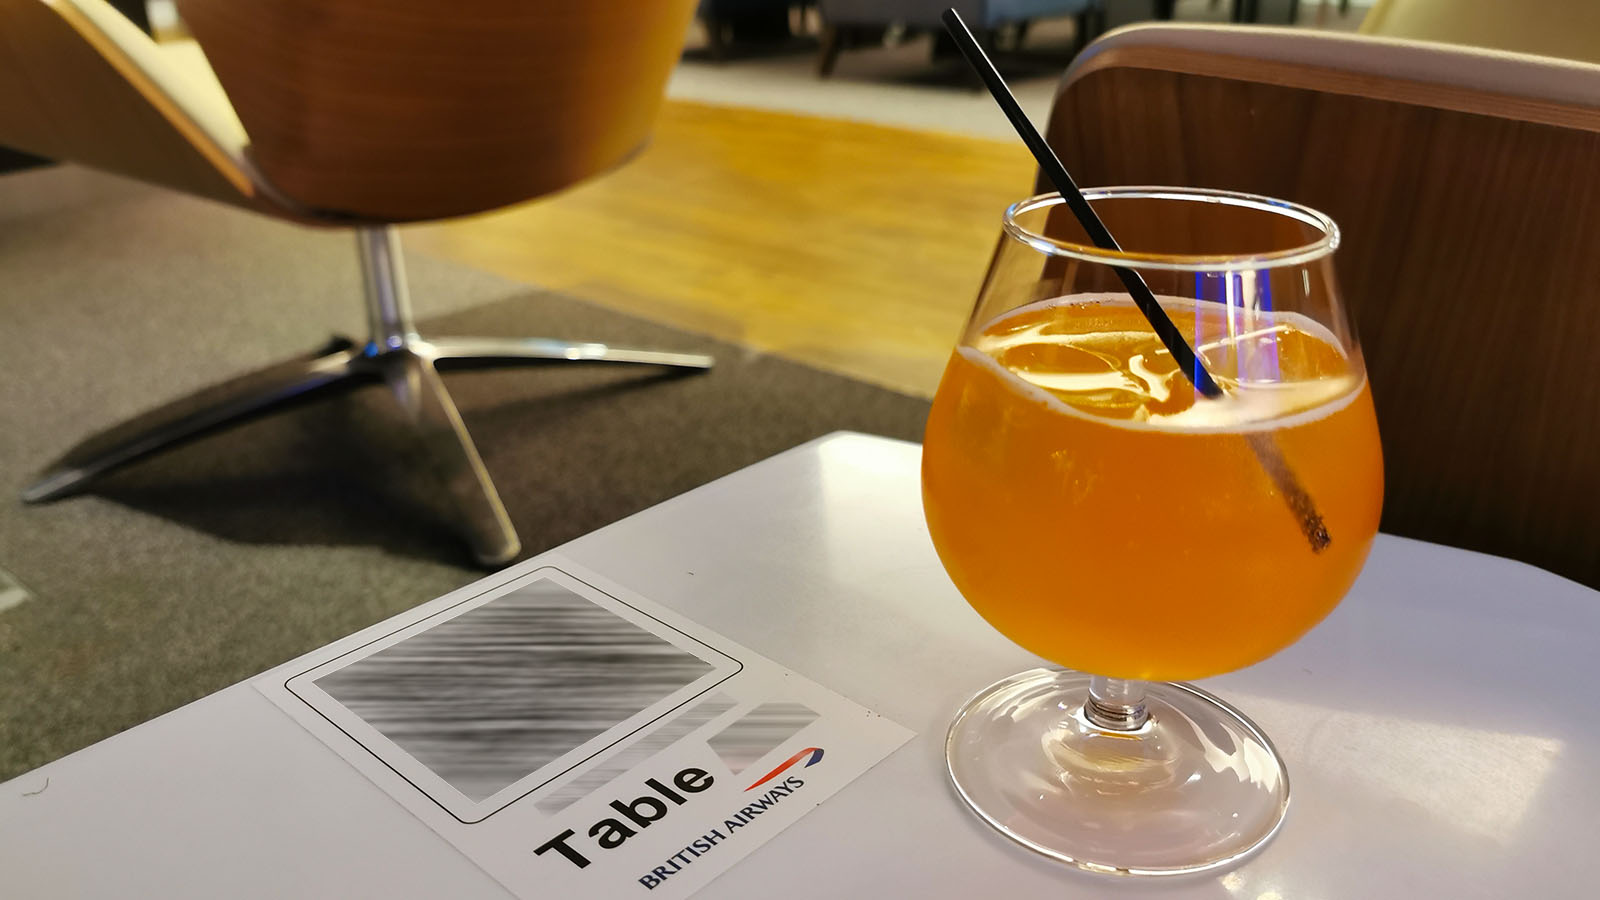 Tequila sunrise cocktail at the British Airways Lounge, Singapore